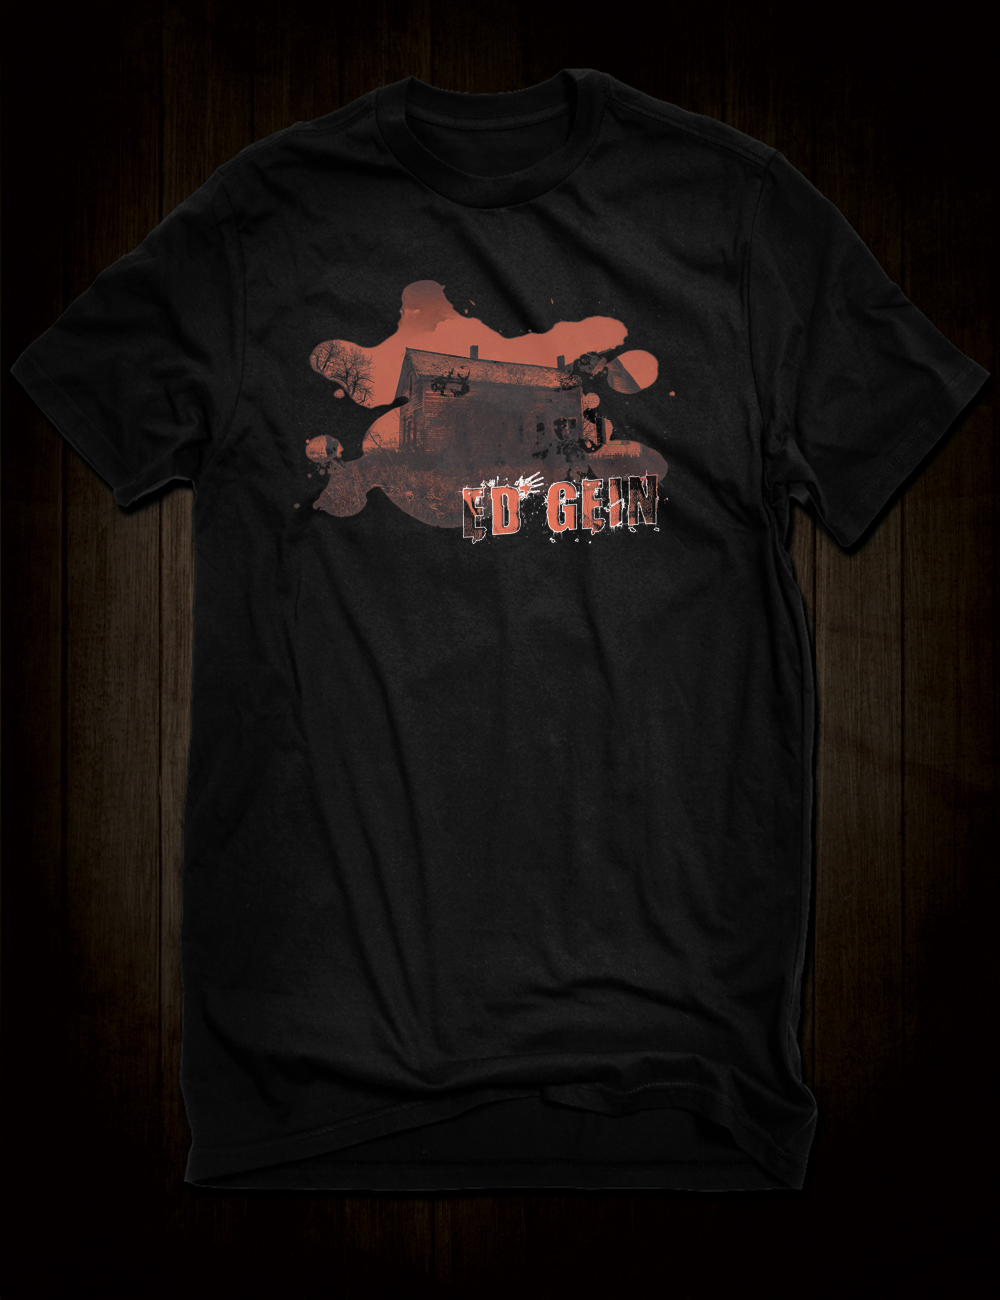 Ed Gein T-Shirt - Hellwood Outfitters